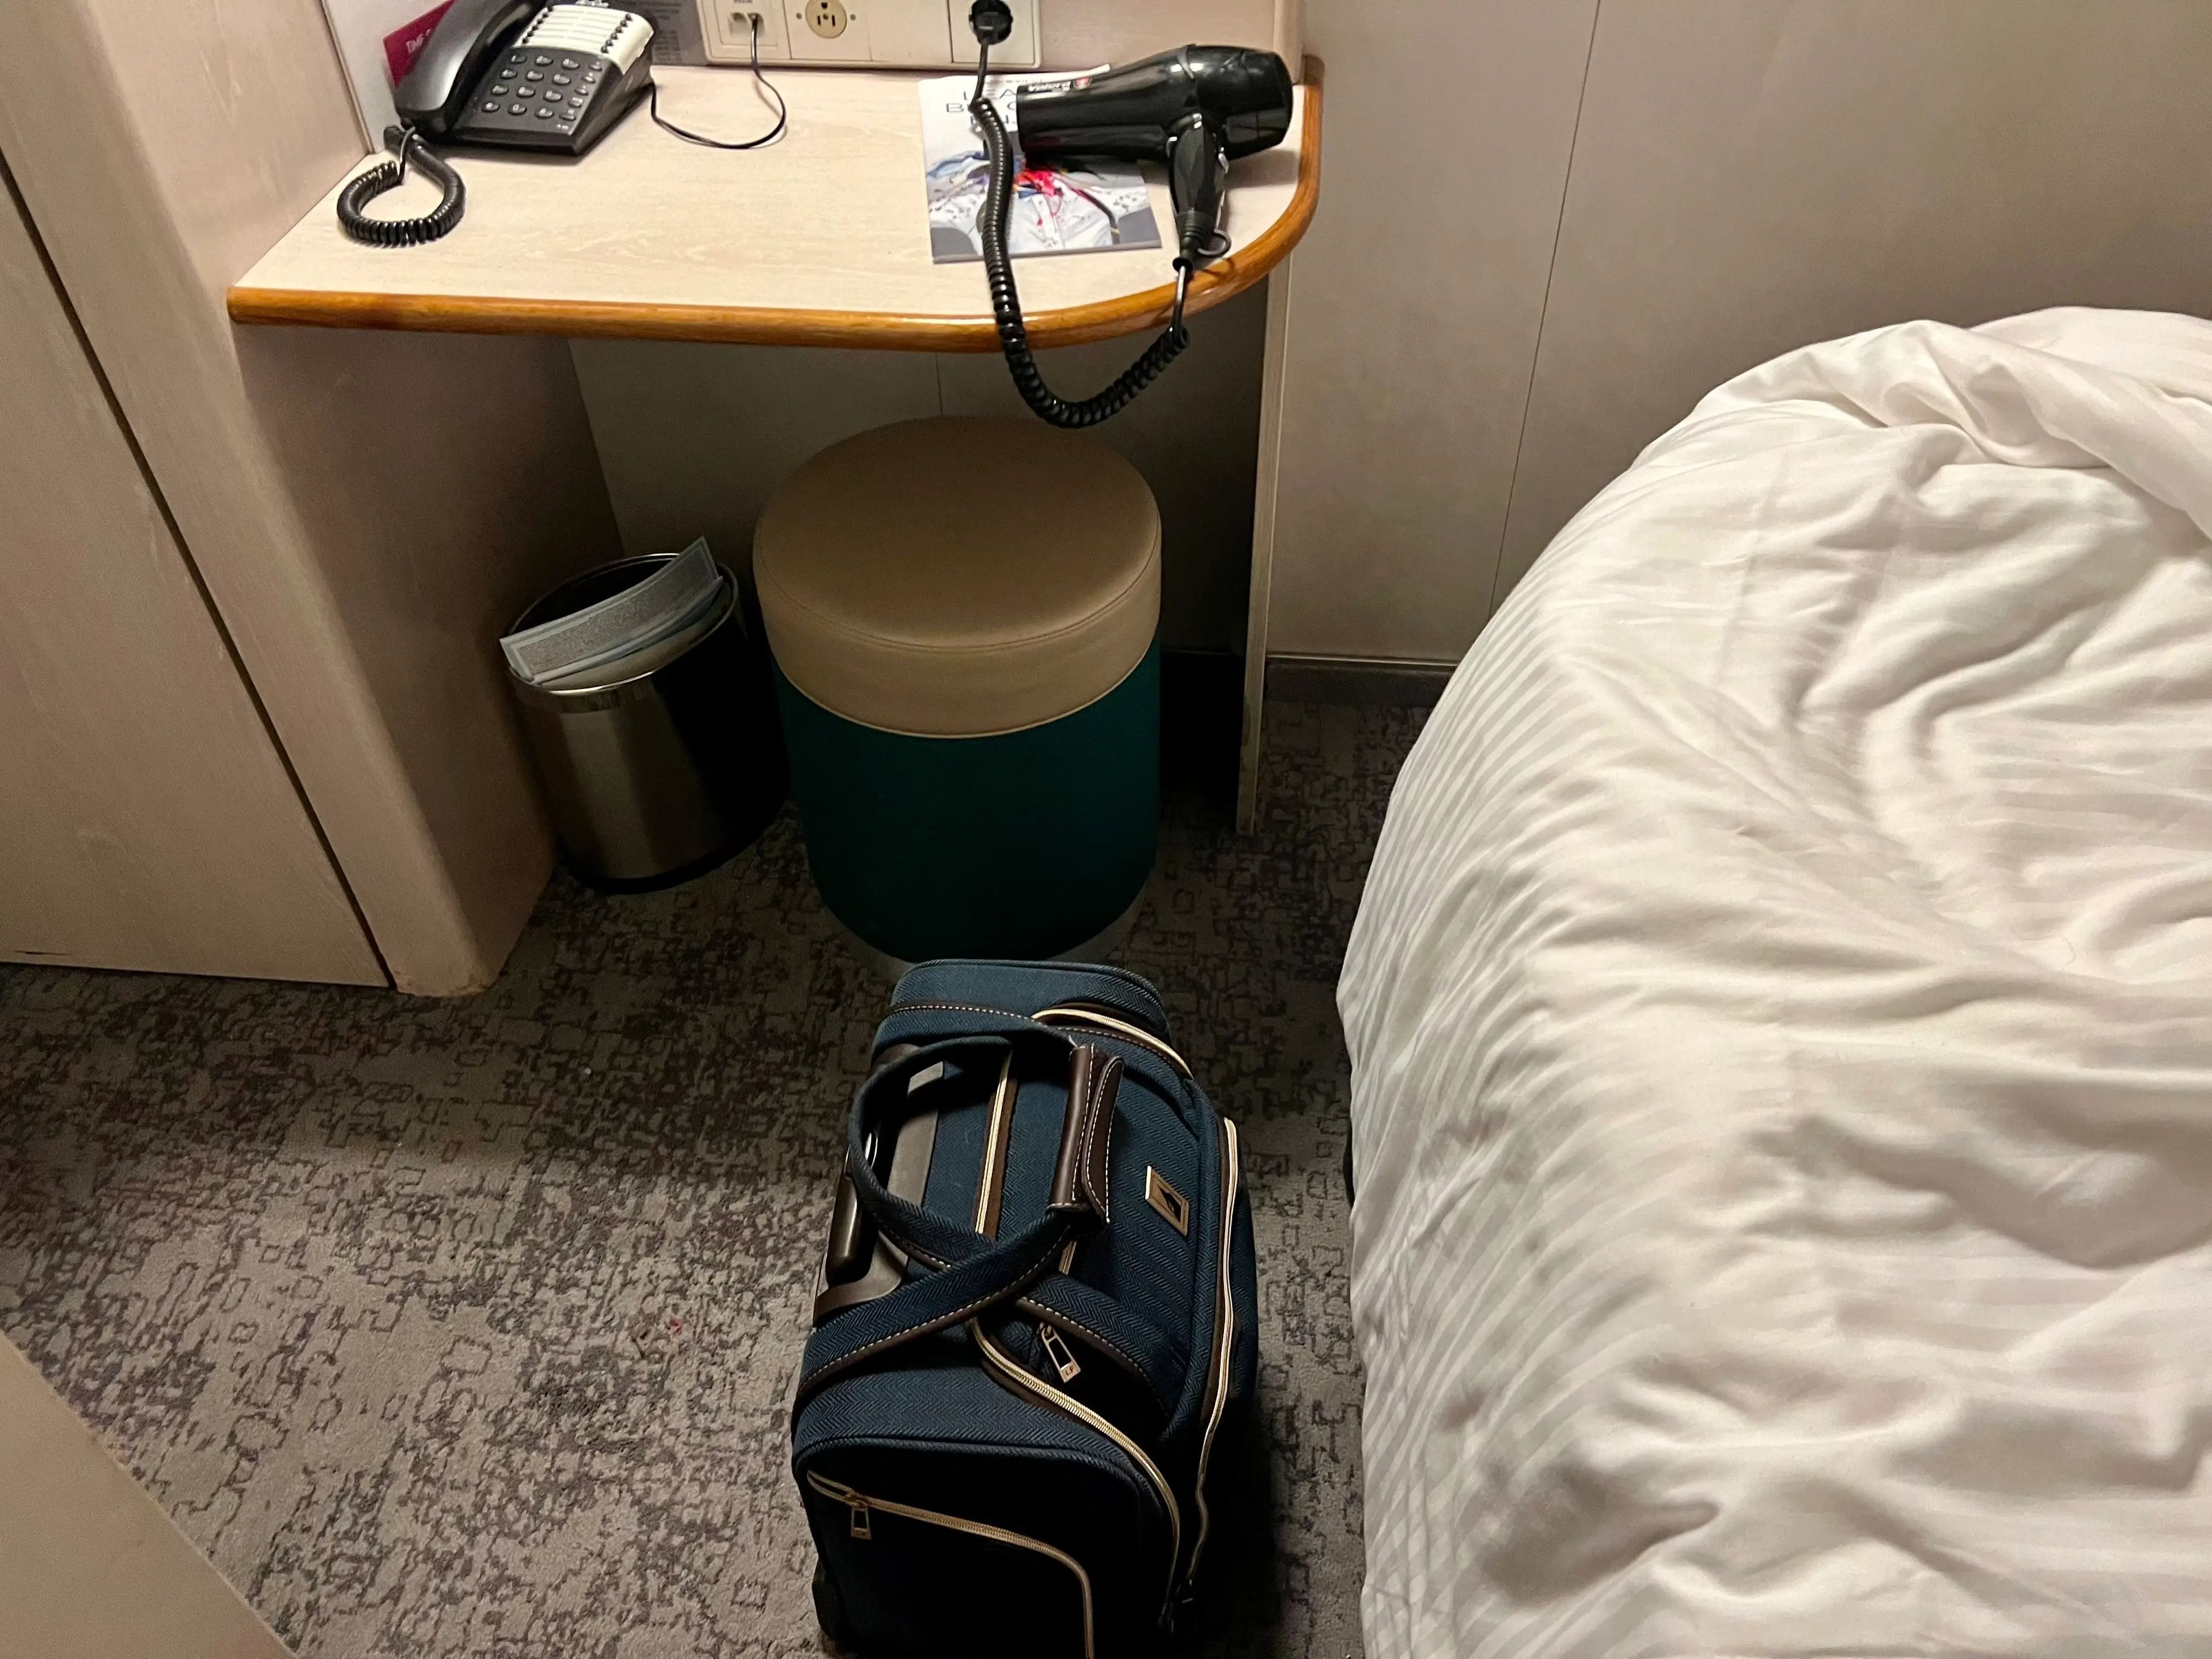 My suitcase on the carpet next to the foot of the bed.